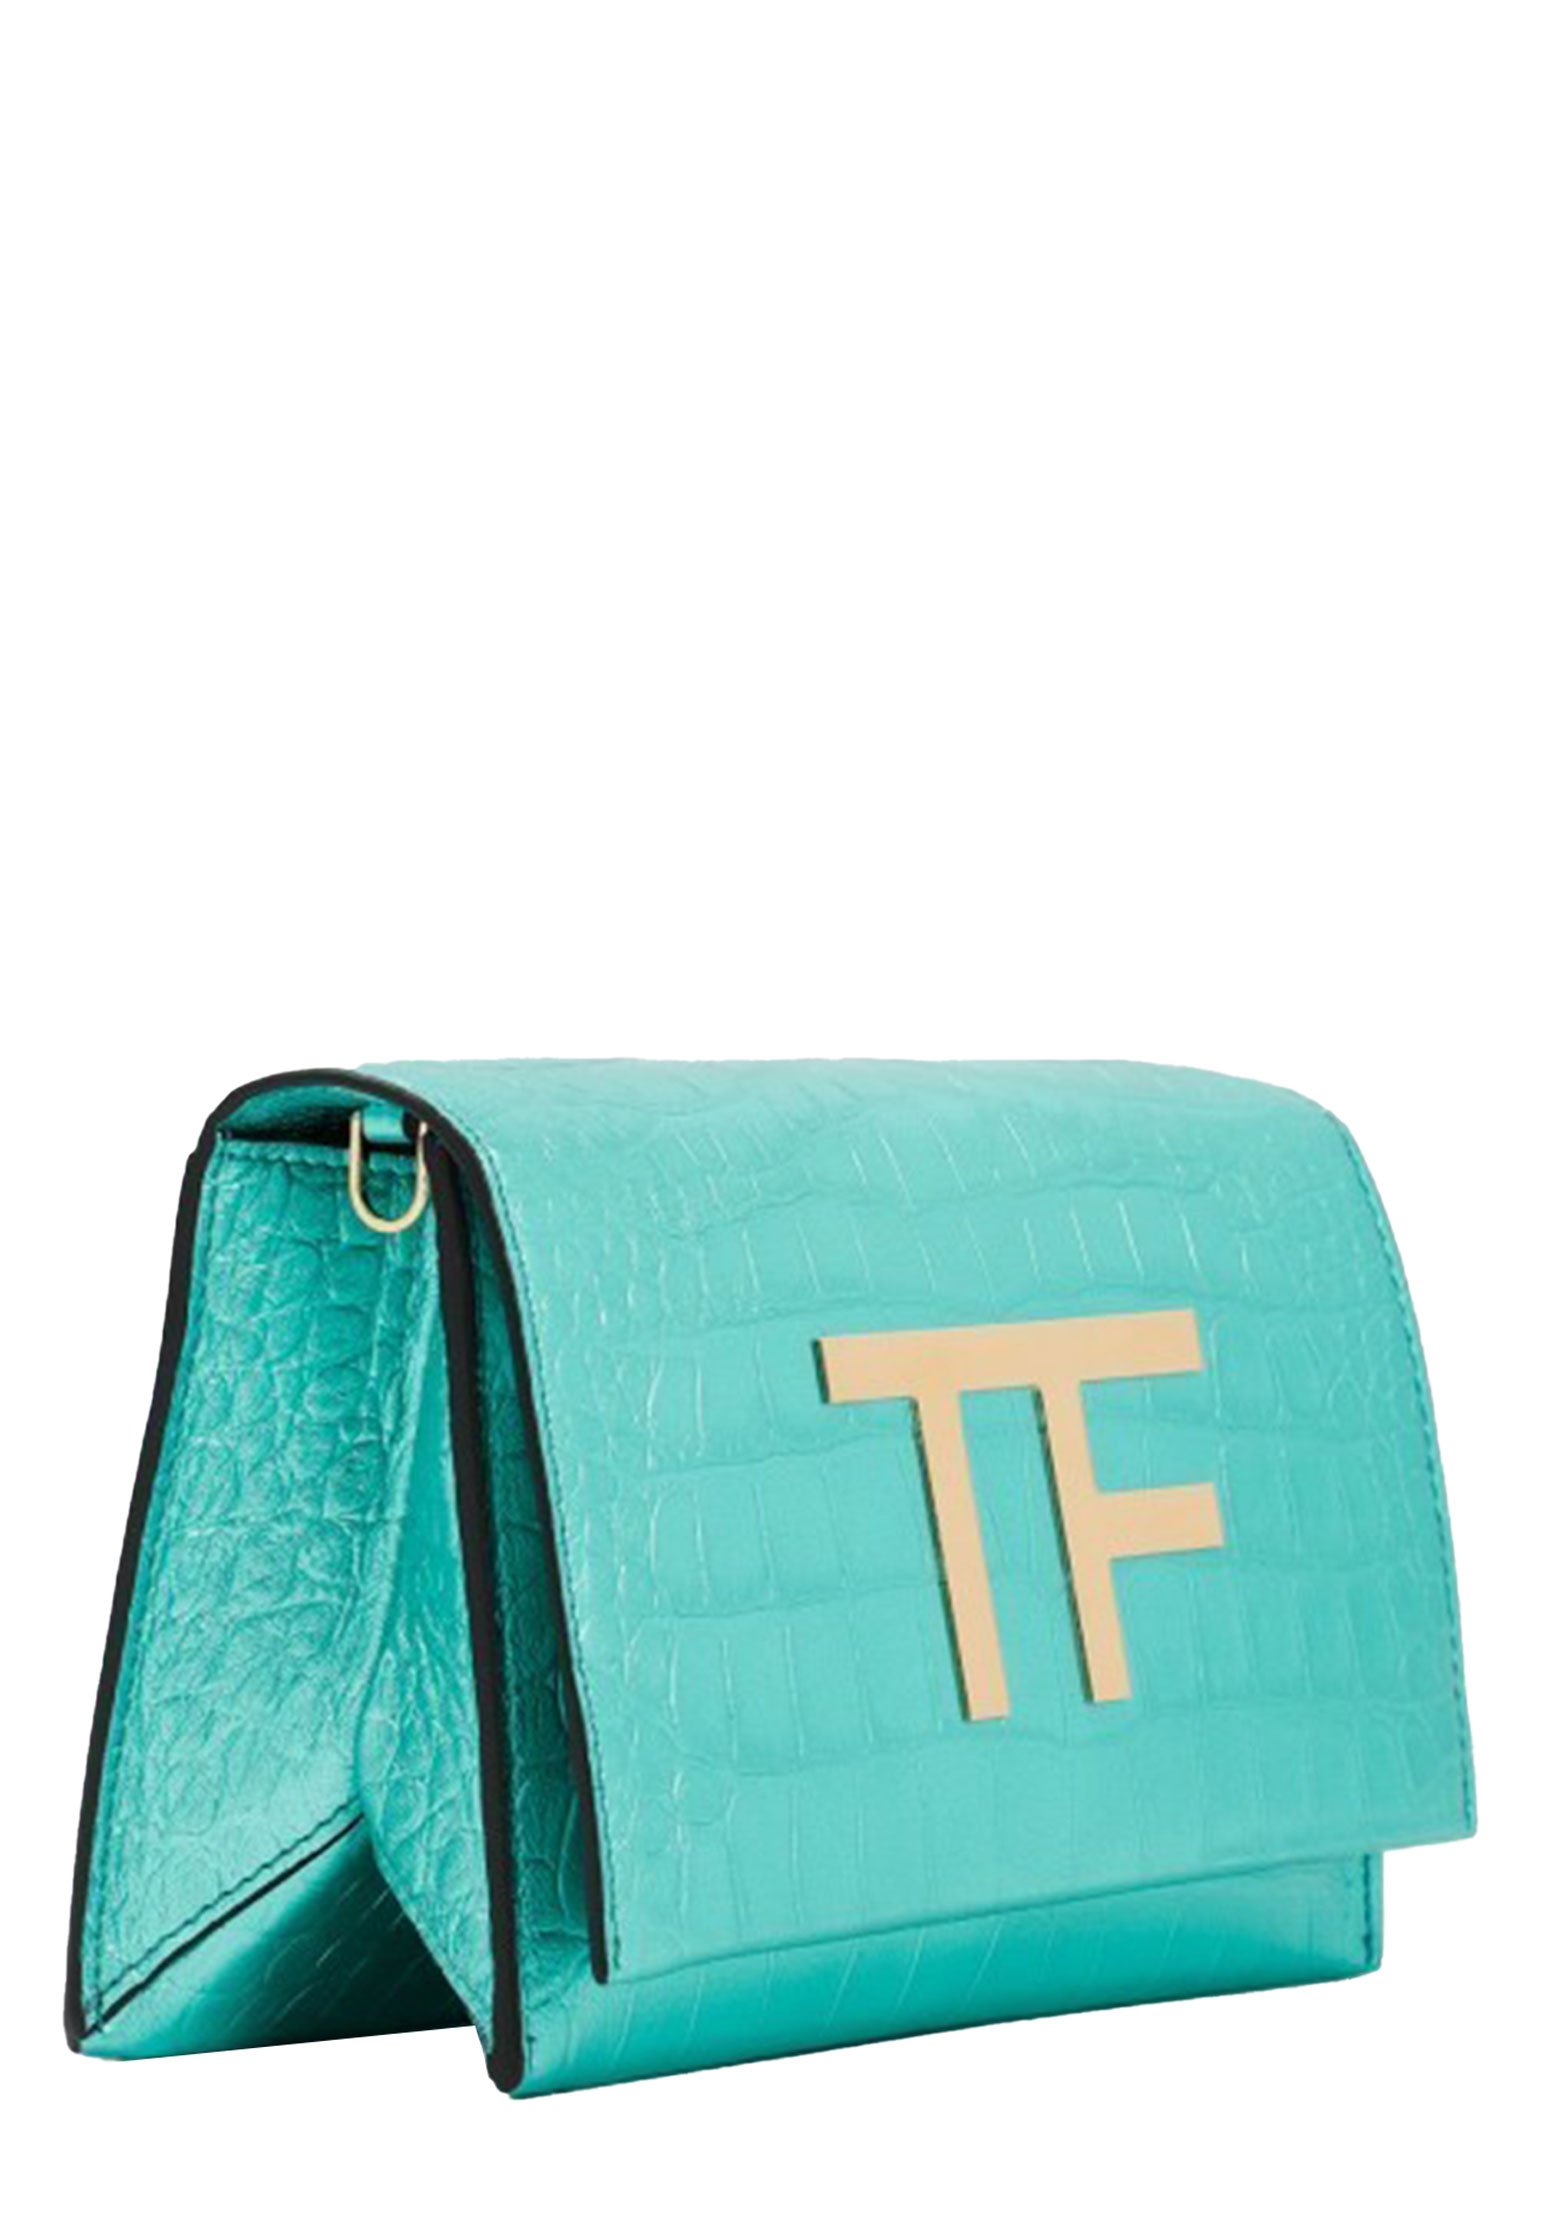 Bag TOM FORD Color: turquoise (Code: 2171) in online store Allure